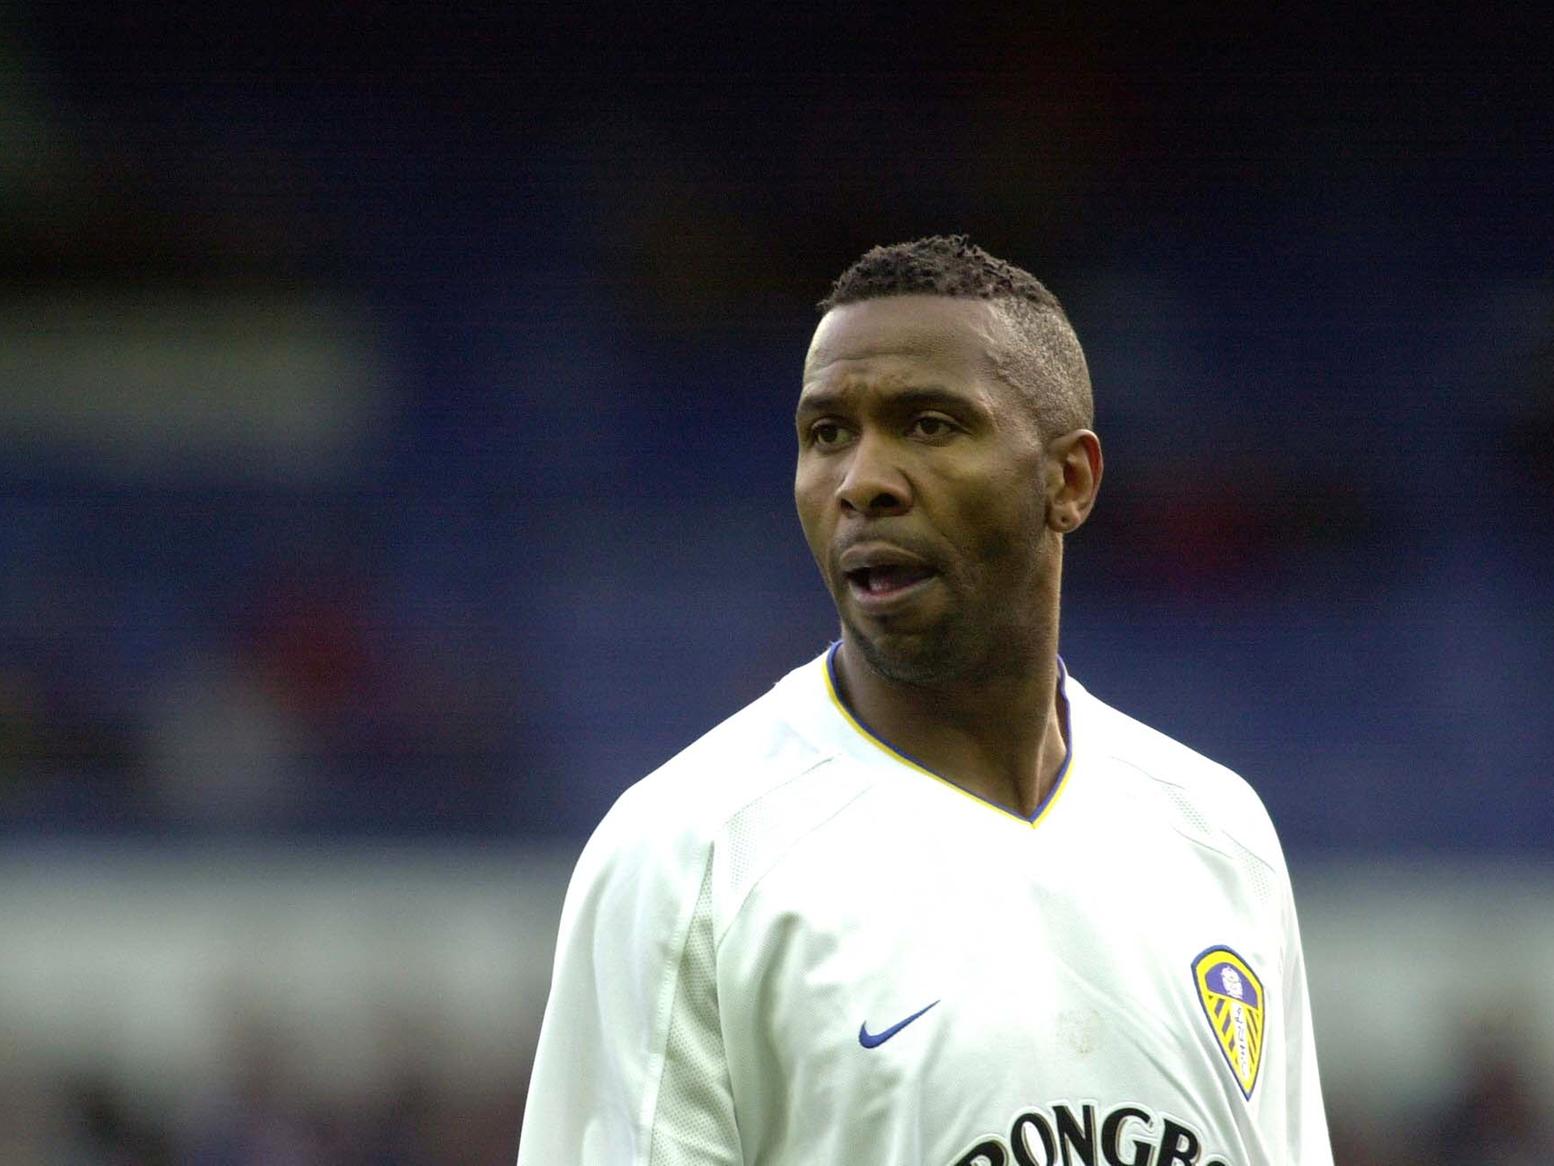 'The Chief' made more than 250 appearances for the Whites. Captain for both club and country.